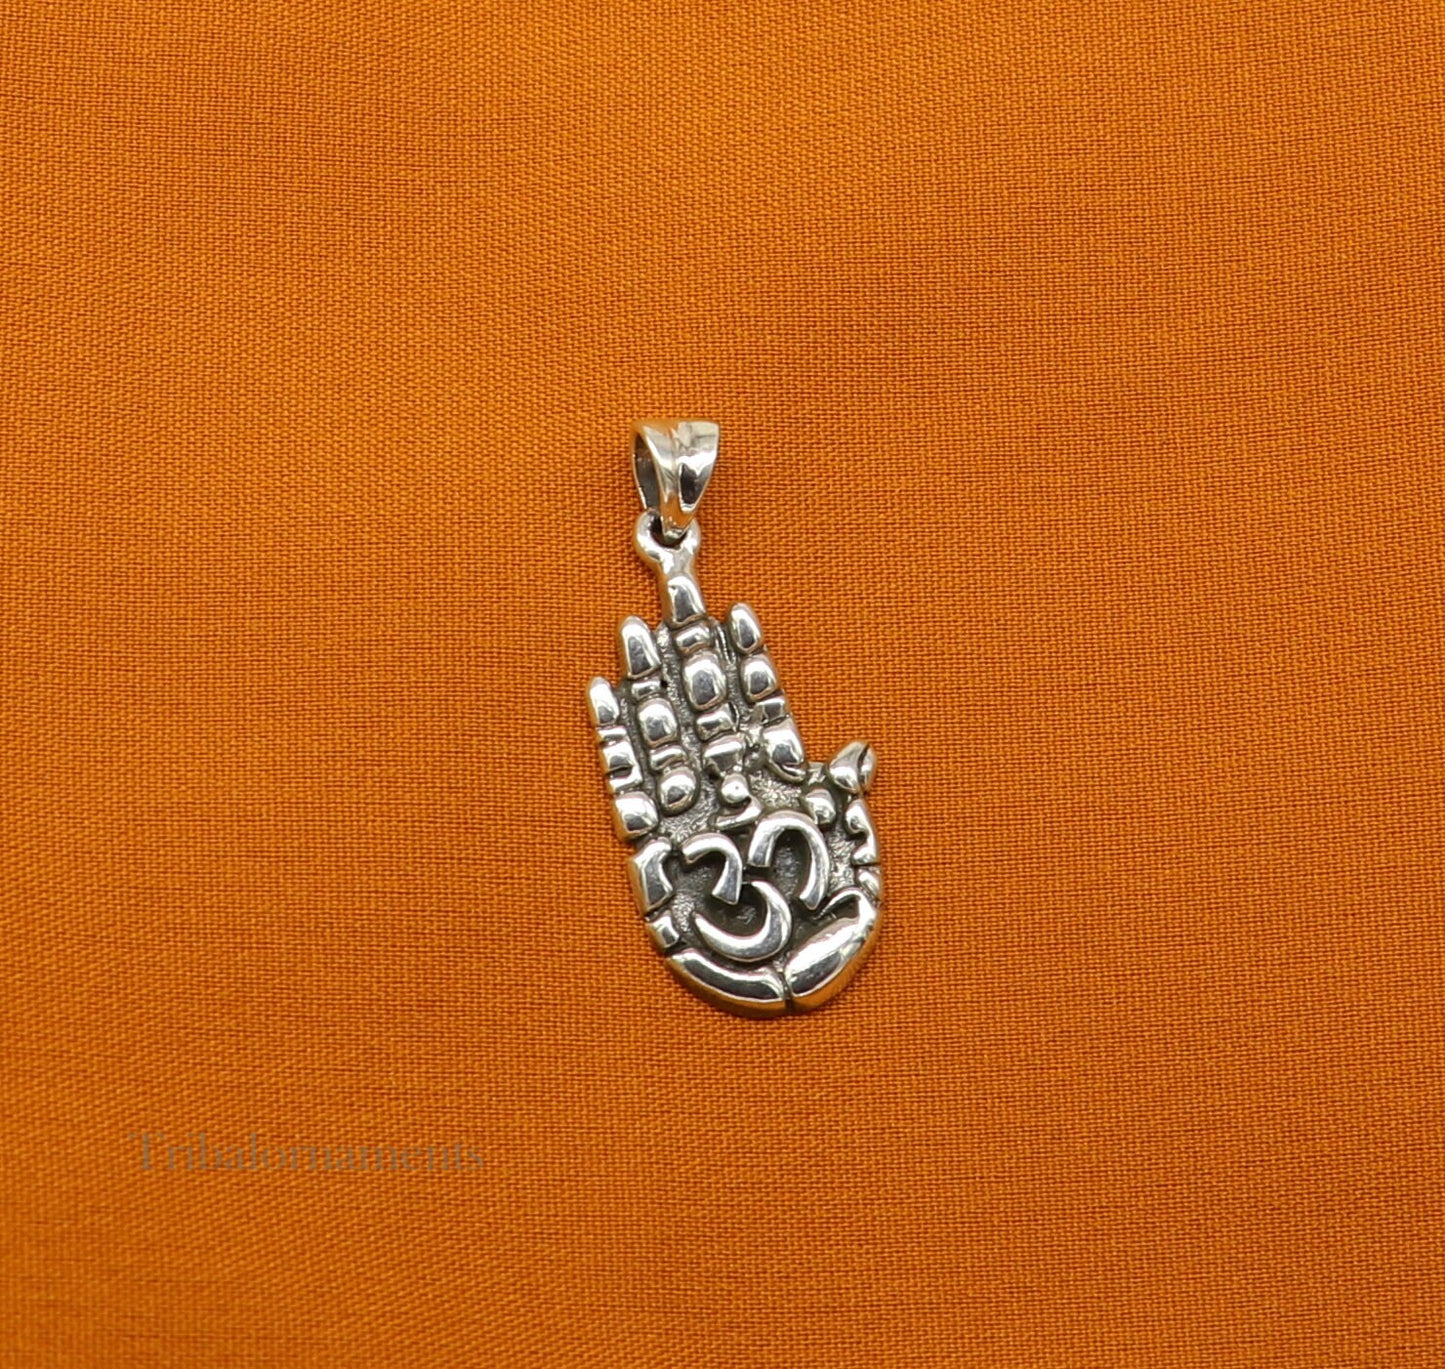 925 sterling silver handmade divine hand palm with 'AUM' excellent unique design pendant, blessing palm pendant from india ssp910 - TRIBAL ORNAMENTS